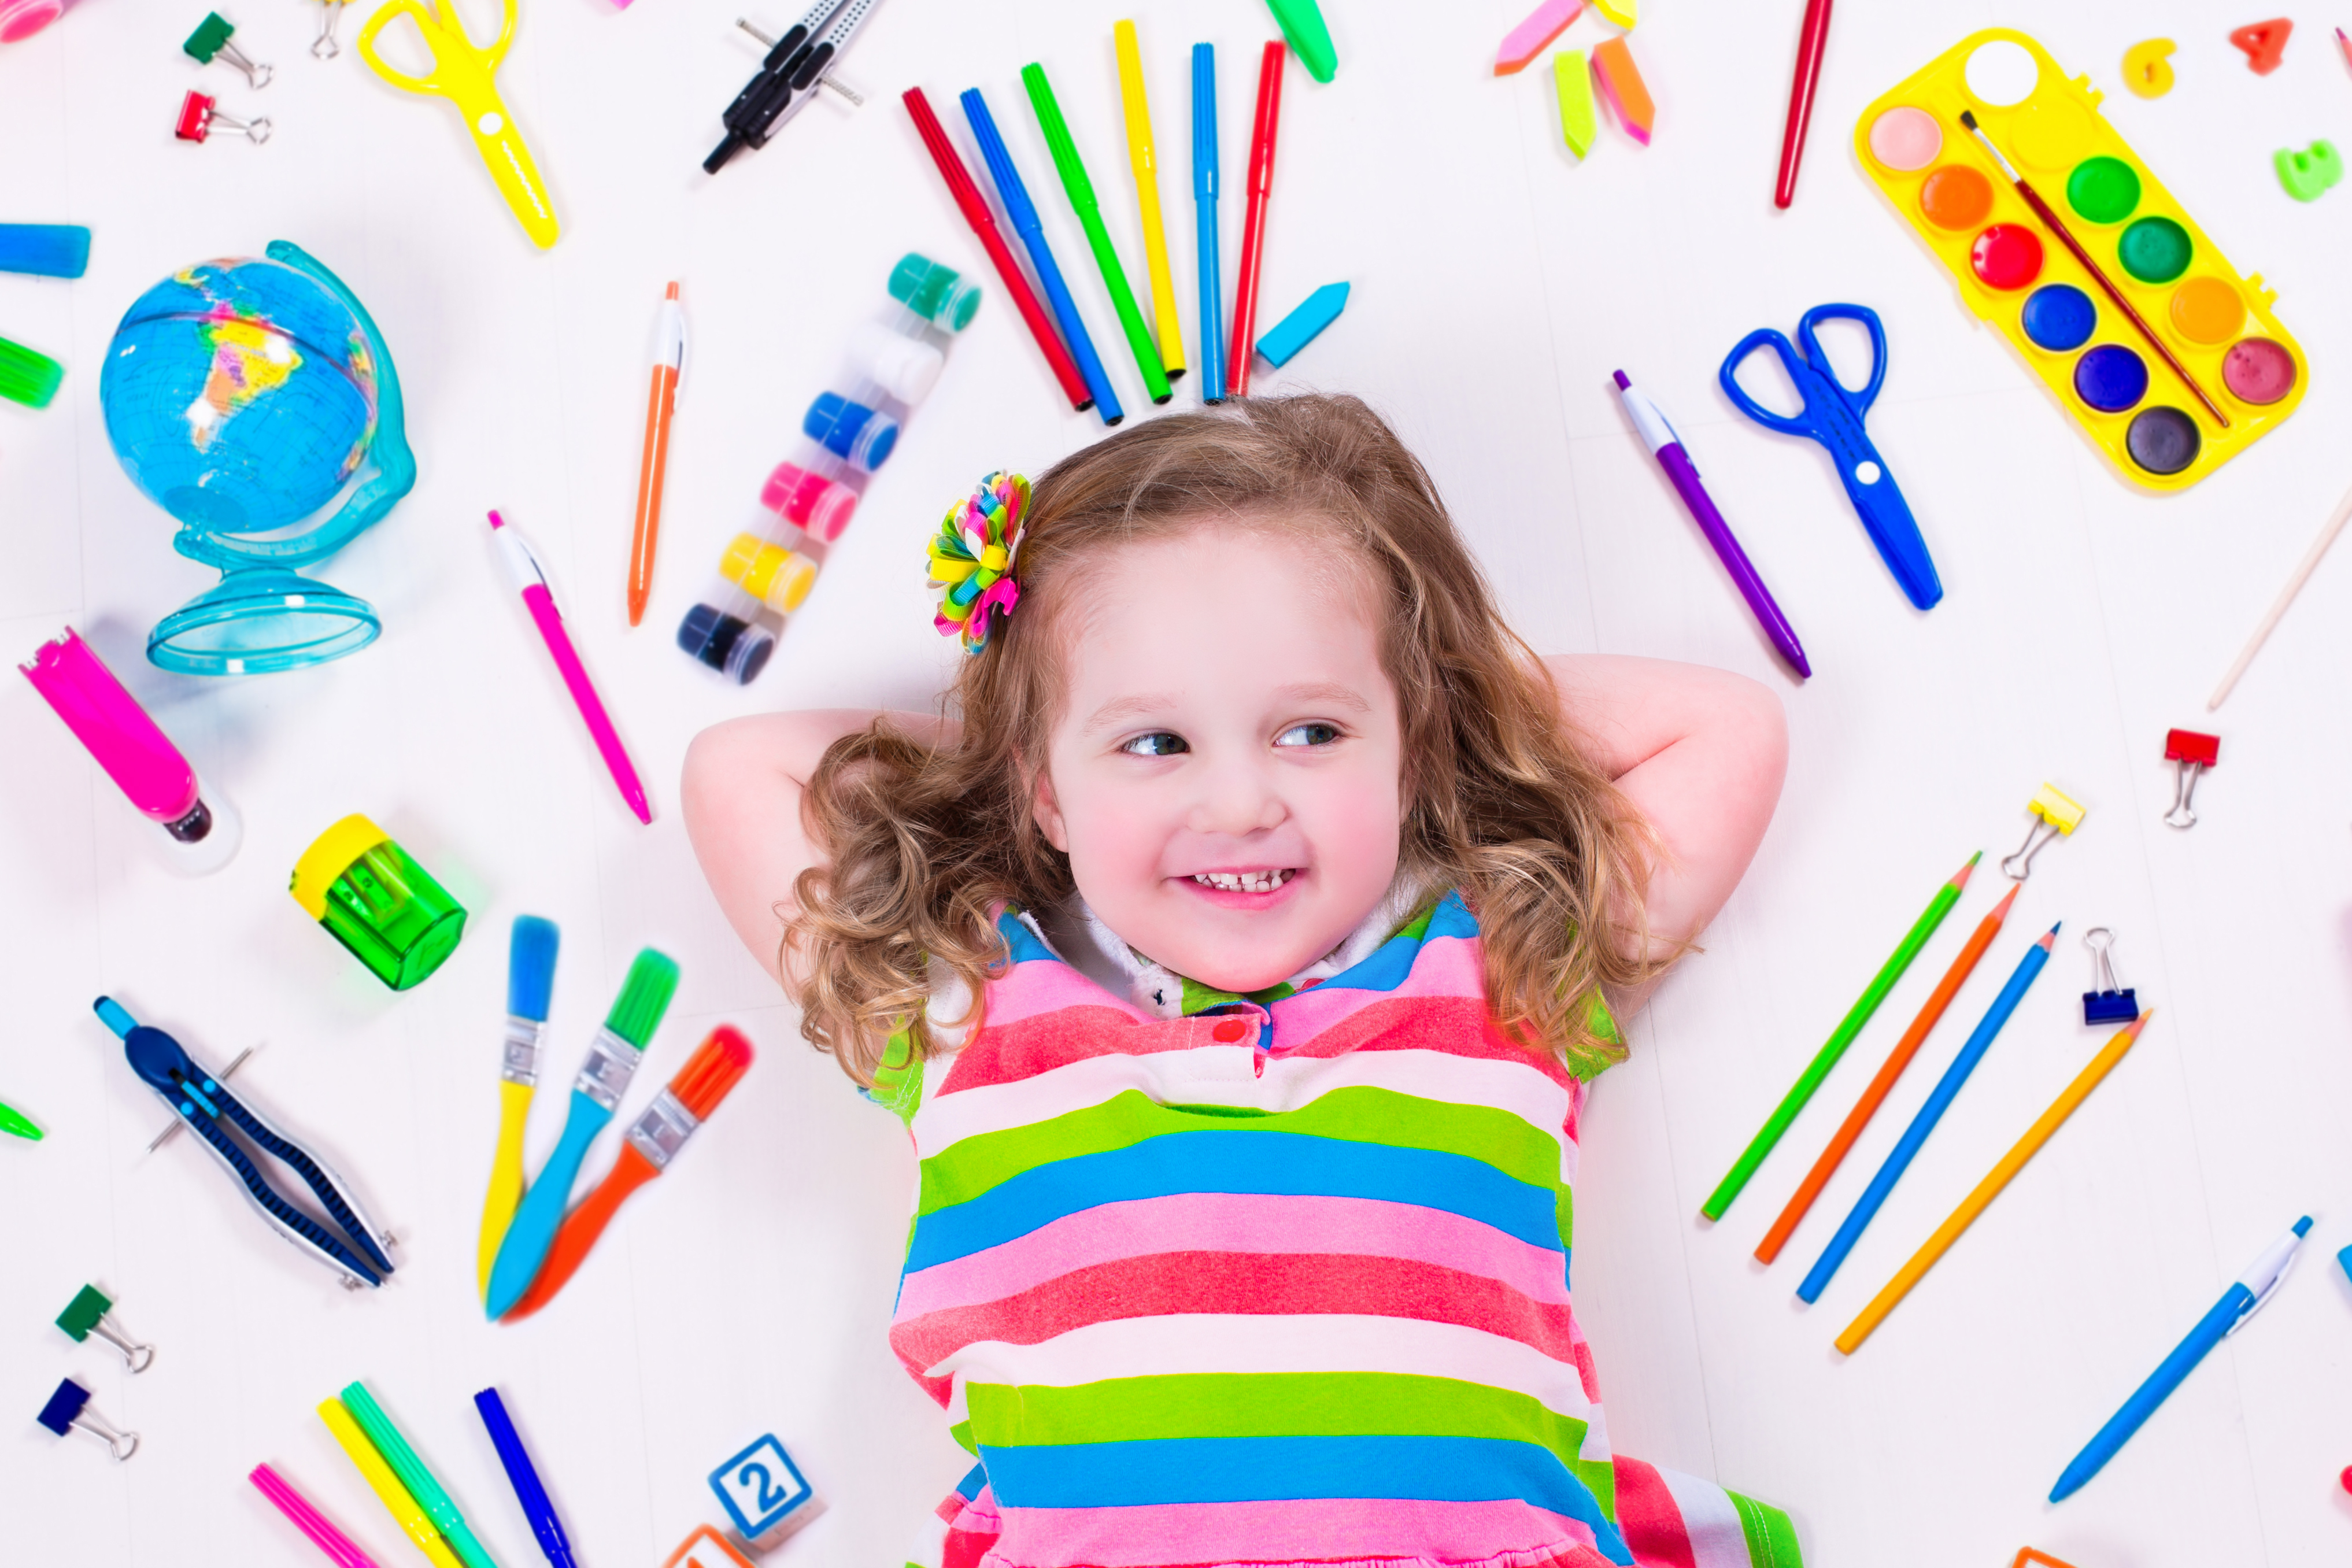 child-with-draw-and-paint-supplies-kids-happy-to-go-back-to-school-preschool-kid-learning-and-studying-creative-children-at-kindergarten.jpg